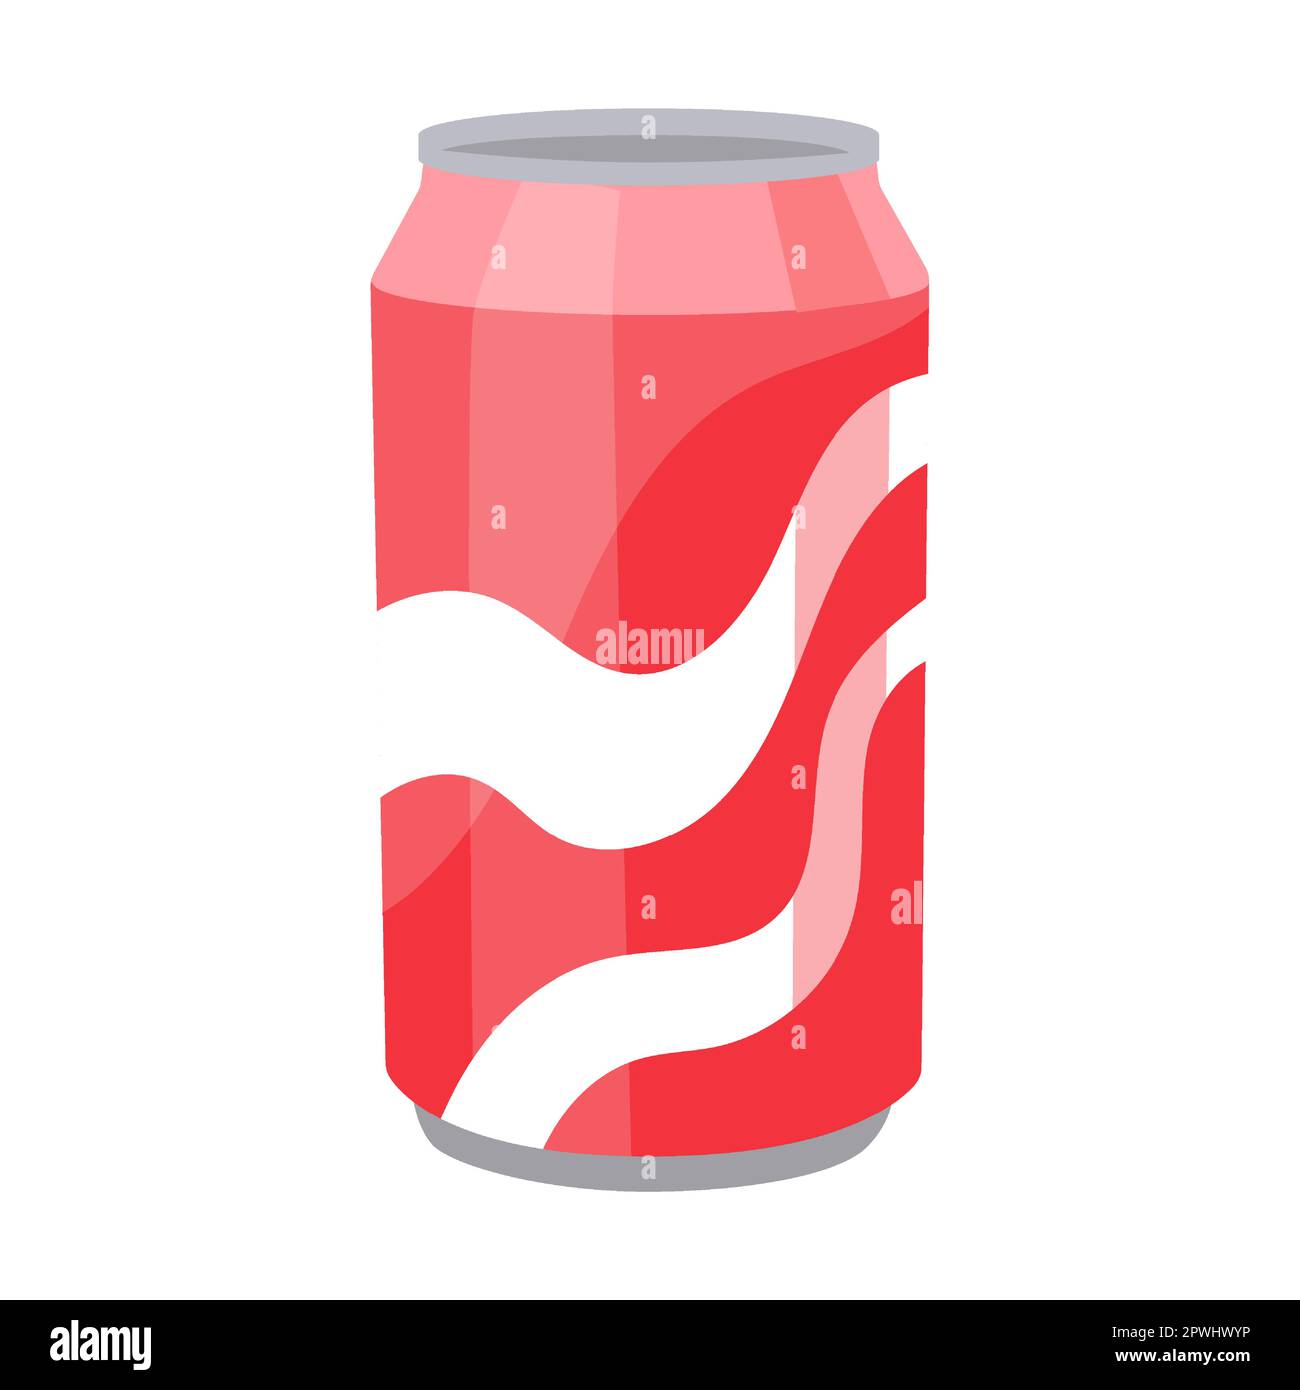 https://c8.alamy.com/comp/2PWHWYP/aluminum-can-of-soda-drinks-flat-vector-illustration-vending-machine-product-isolated-on-white-background-junk-food-2PWHWYP.jpg